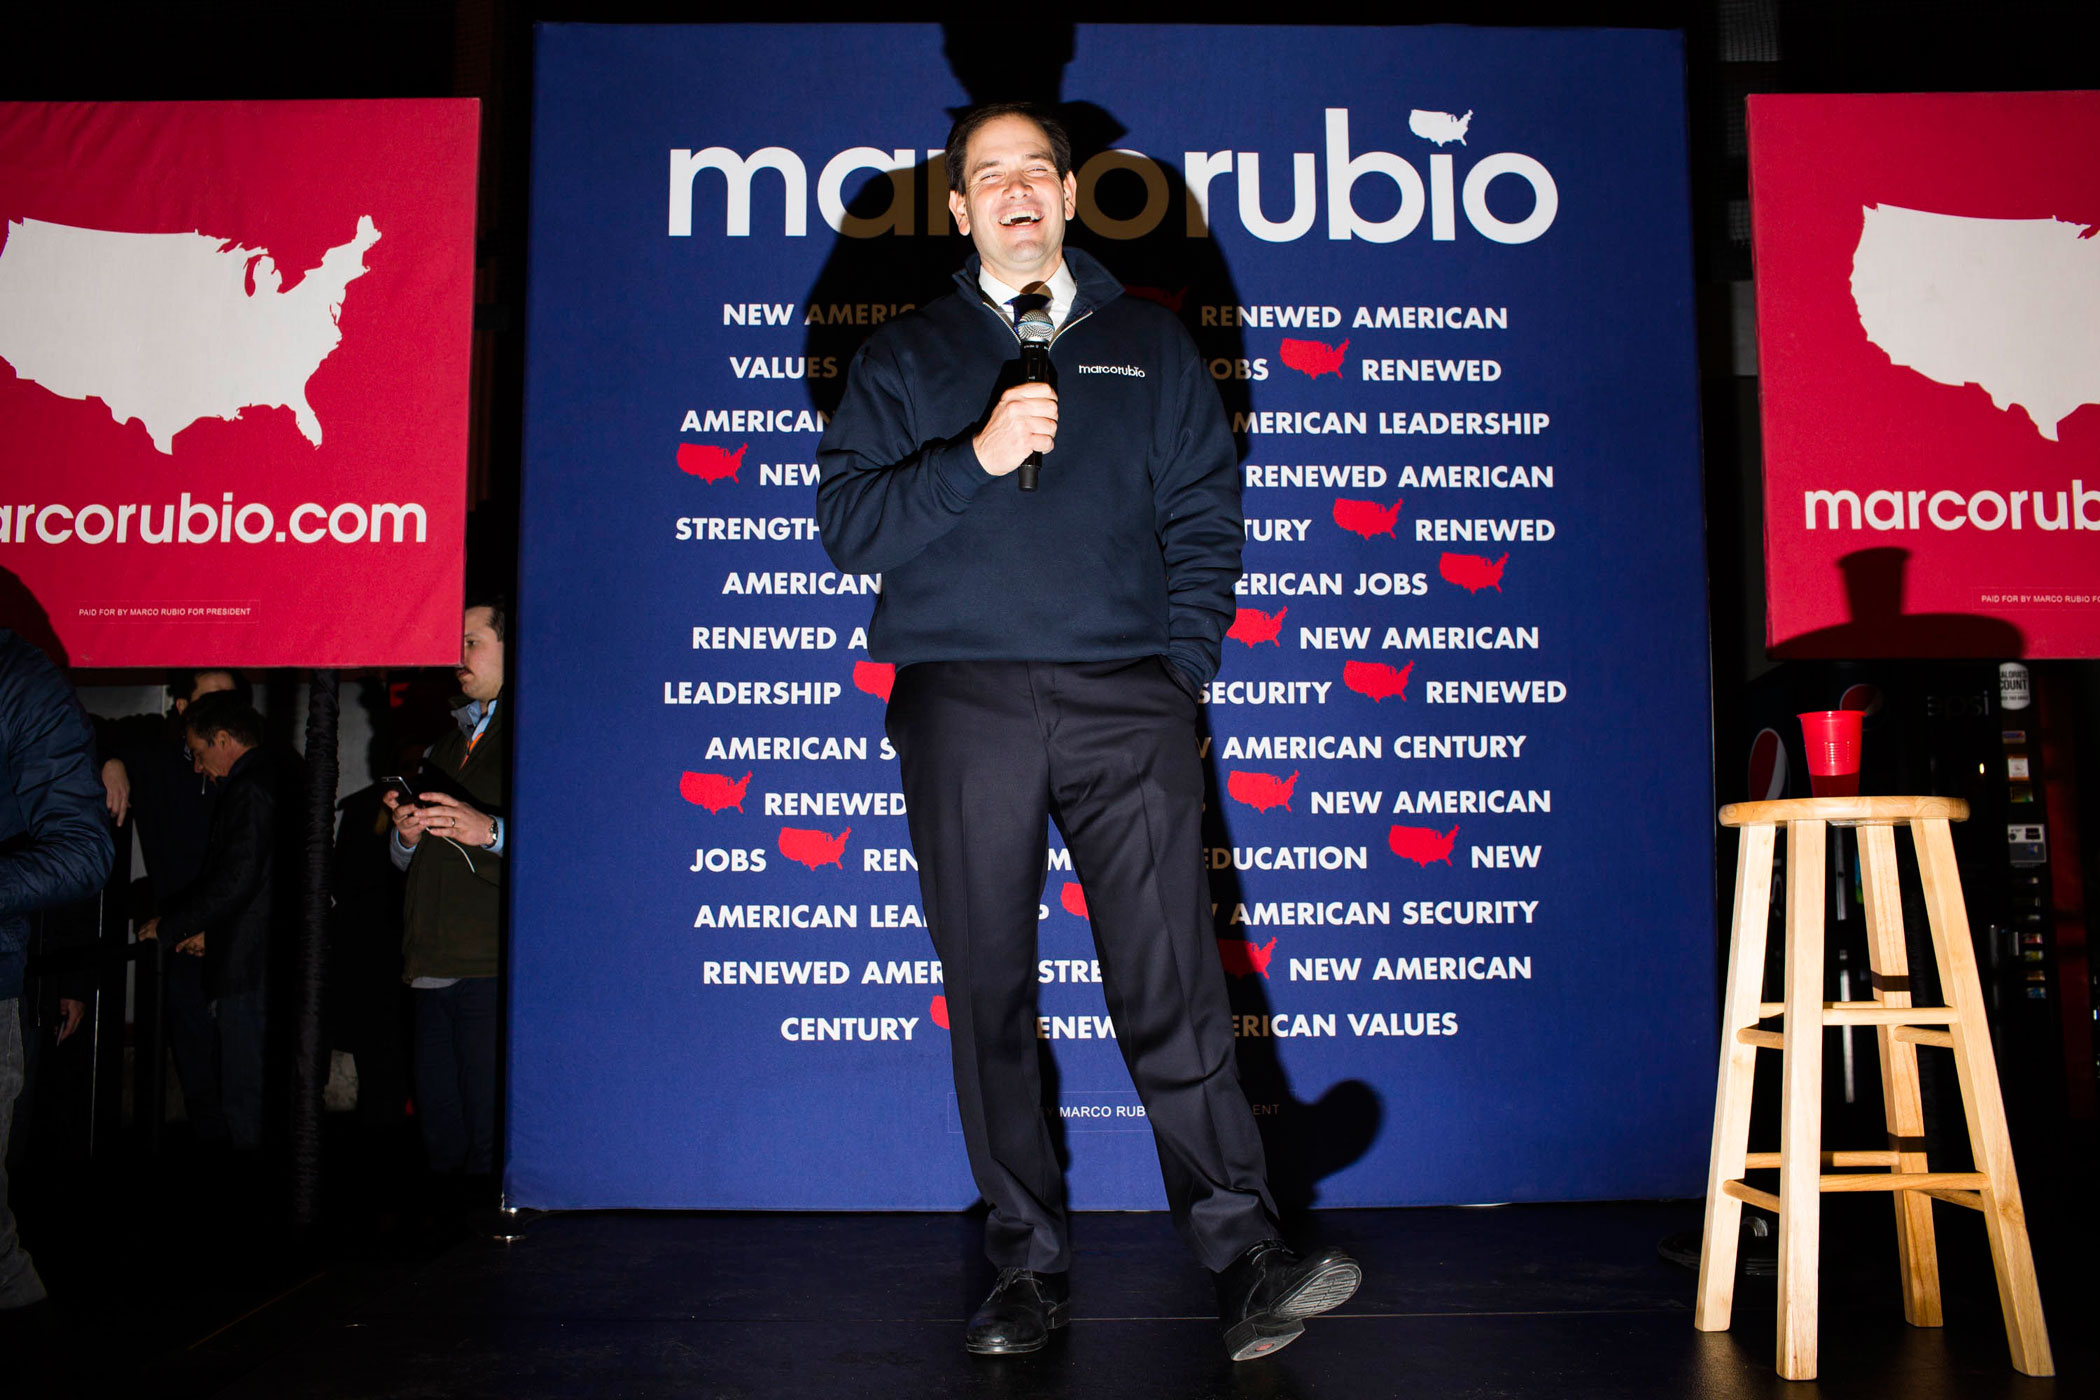 Republican presidential candidate, Florida. Sen. Marco Rubio speaks to attendees during a campaign event at the Allard Center on Feb. 7, 2016, in Manchester, N.H.